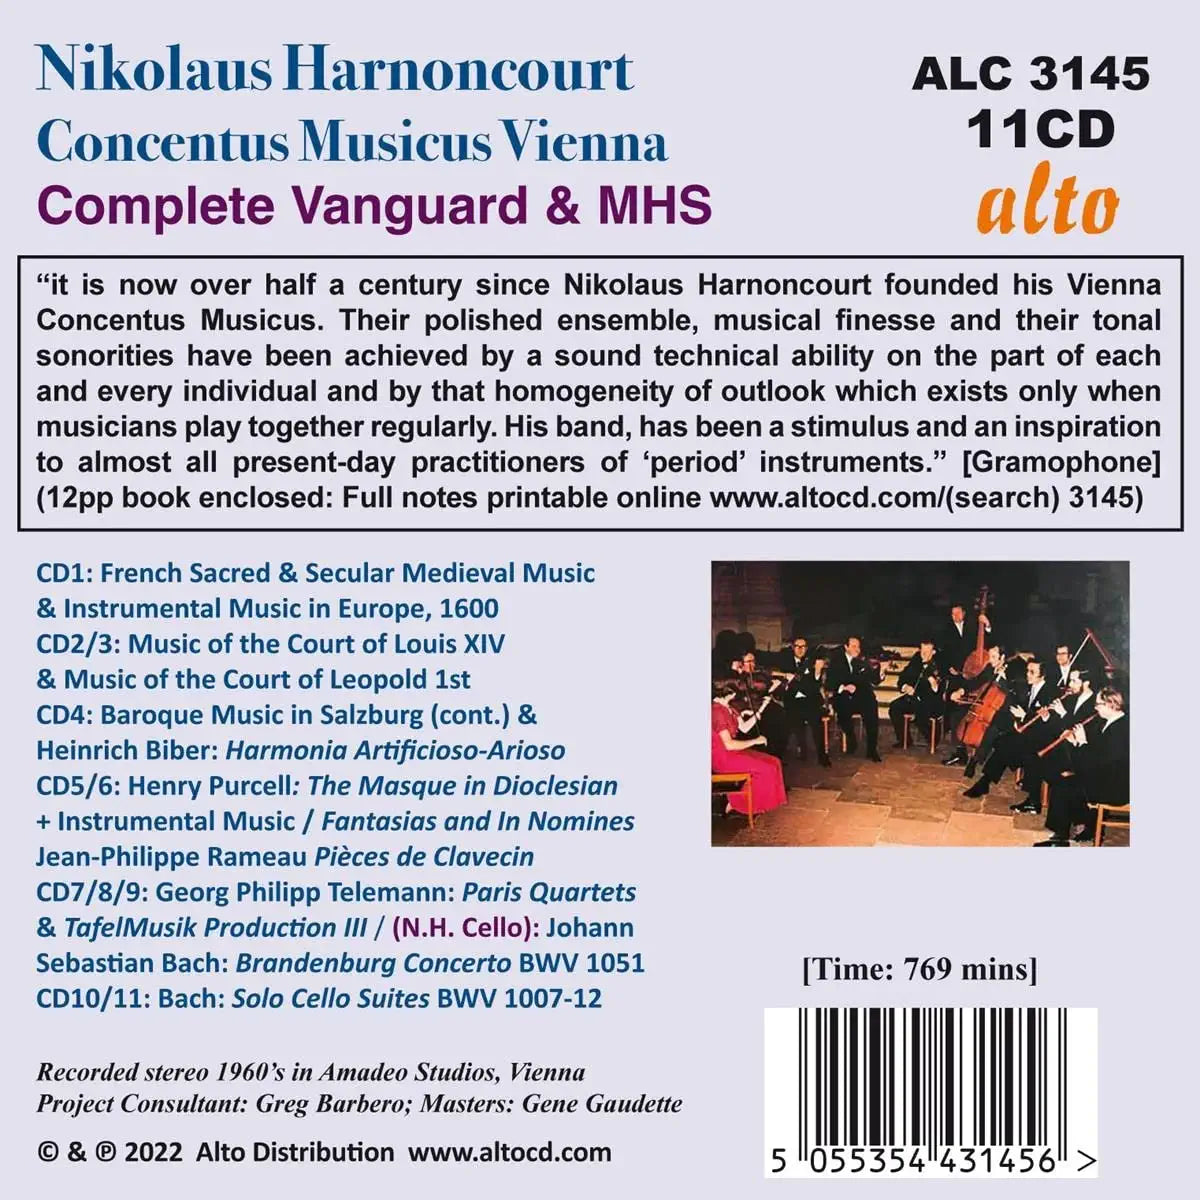 Nikolaus Harnoncourt & Concentus Musicus Wien - The Complete Vanguard & Musical Heritage Society Recordings (11 CDs, OR 11 CDS/Digital Download Bundle)